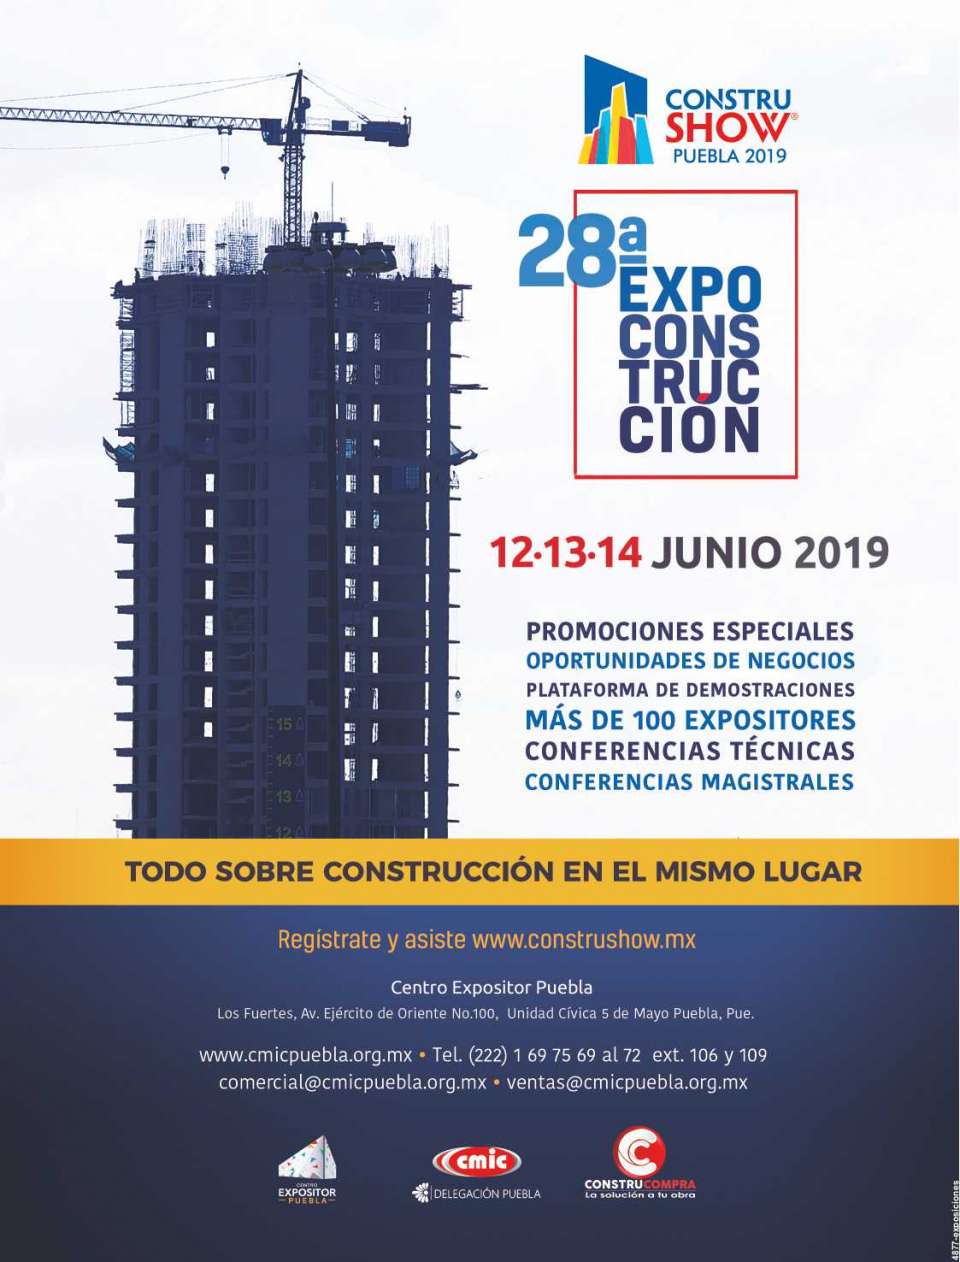 8a. EXPO CONSTRUCCION Constru-Show. The largest Expo in the Southeast. Los Fuertes Exhibitor Center in Puebla. - Next event 12 to June 14, 2019.